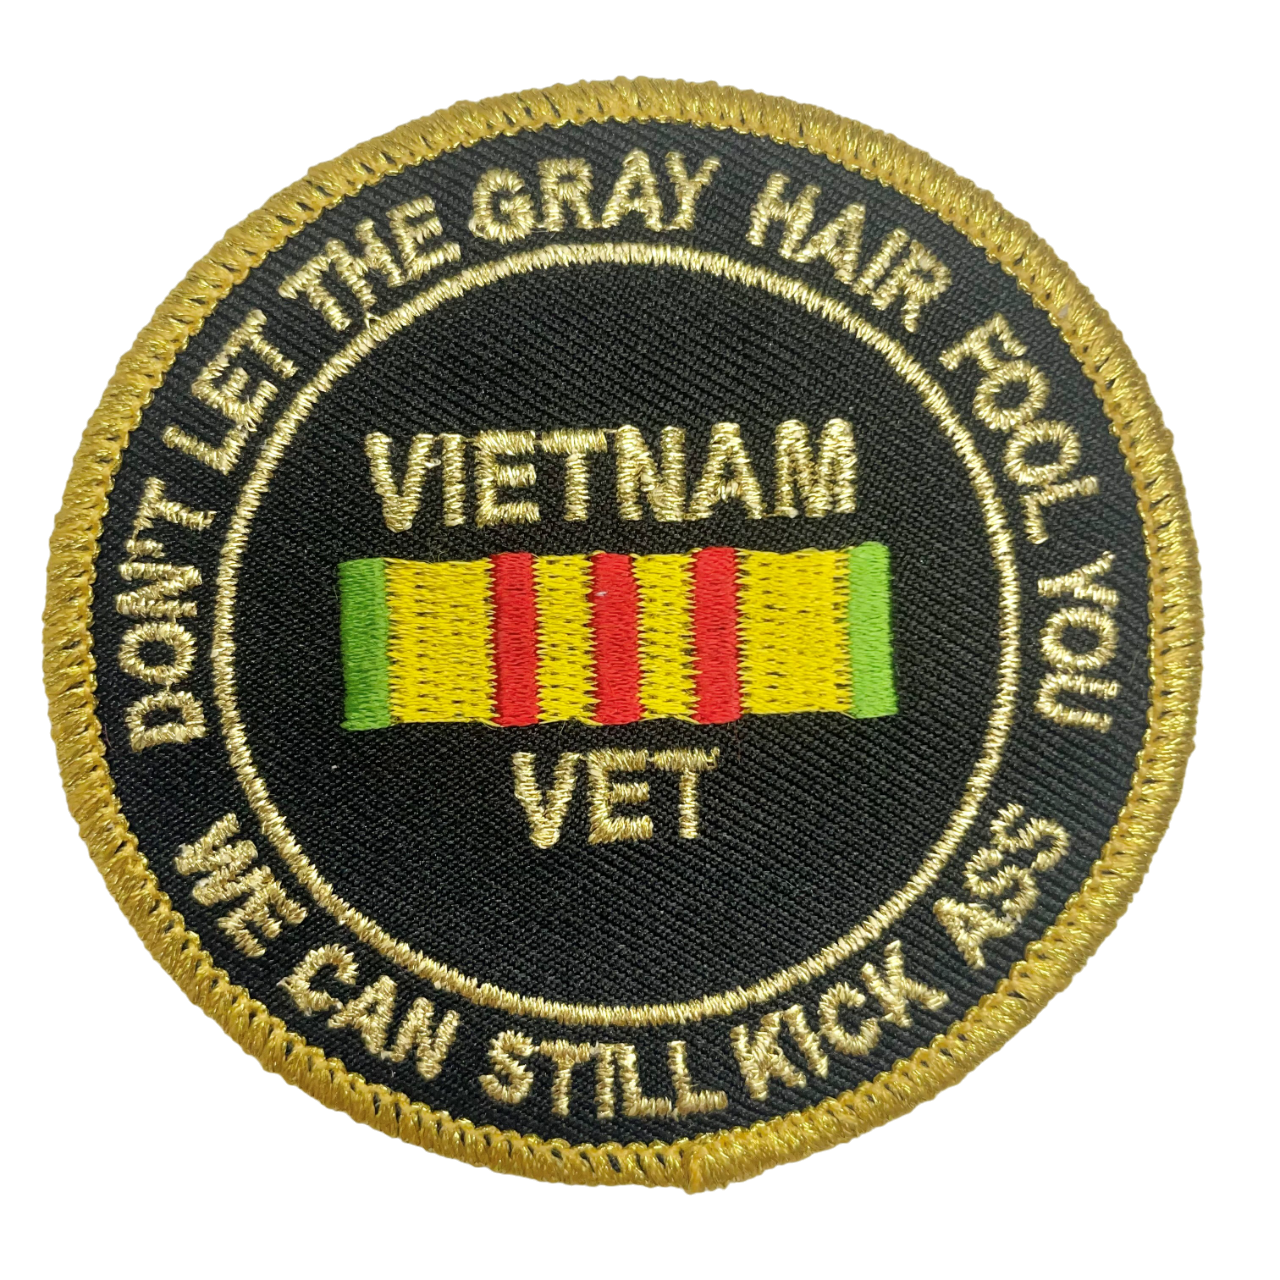 Vietnam Veteran - "Don't Let The Gray Hair Fool You" - USMC Sew-On Patch